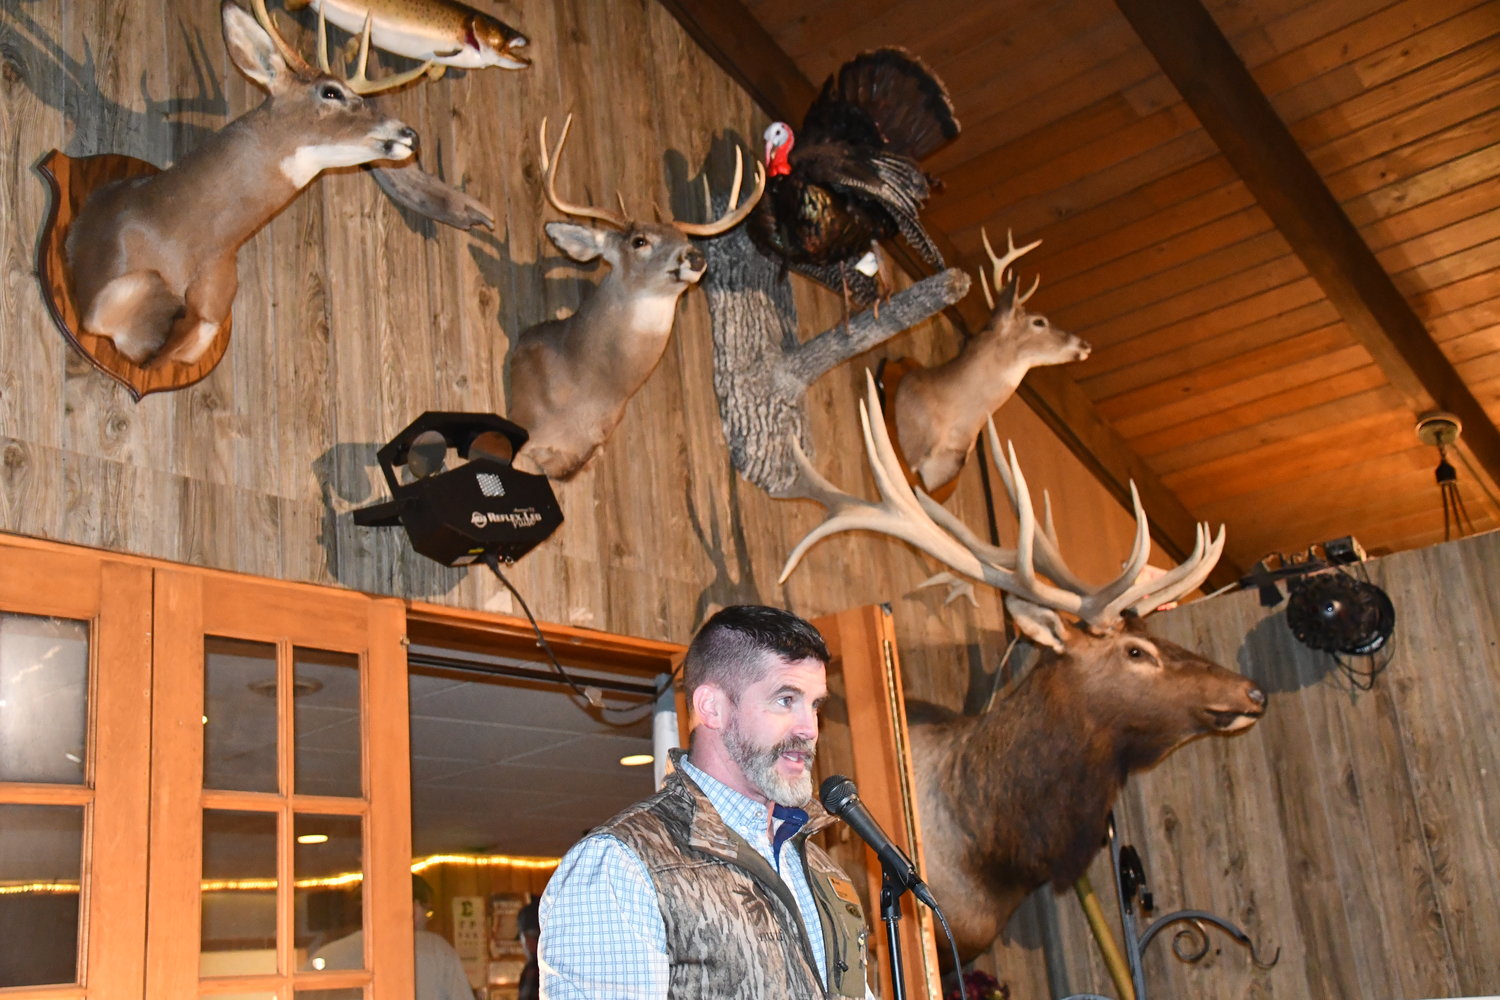 The man behind the mic is National Wild Turkey Federation Northeastern Regional Director Carter Heath. Here he announces a winner of another drawing, the highlight of the event, which helps raise money for both the NWTF and local chapter, Sullivan County Long Beards.